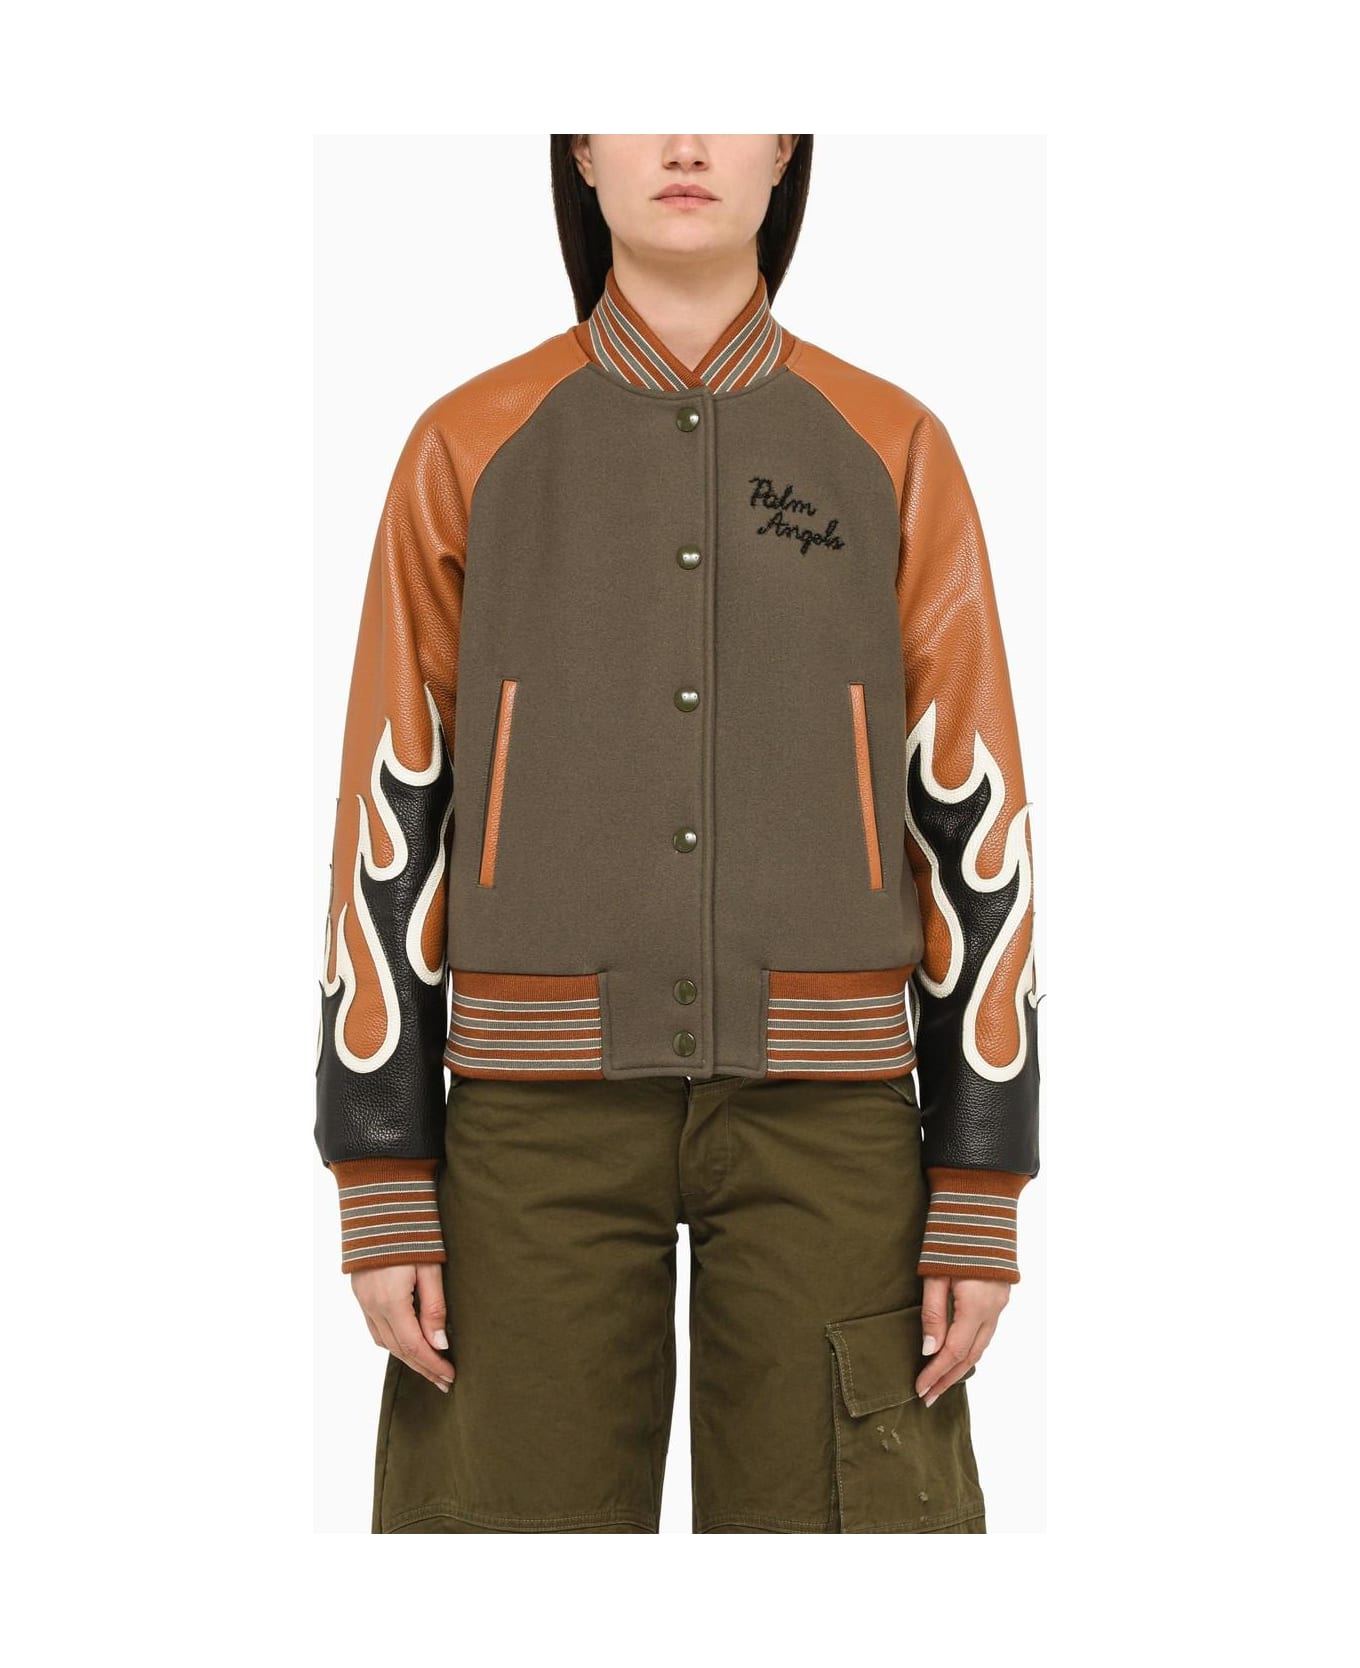 Palm Angels Military Bomber Jacket With Leather Sleeves - Multiple colors